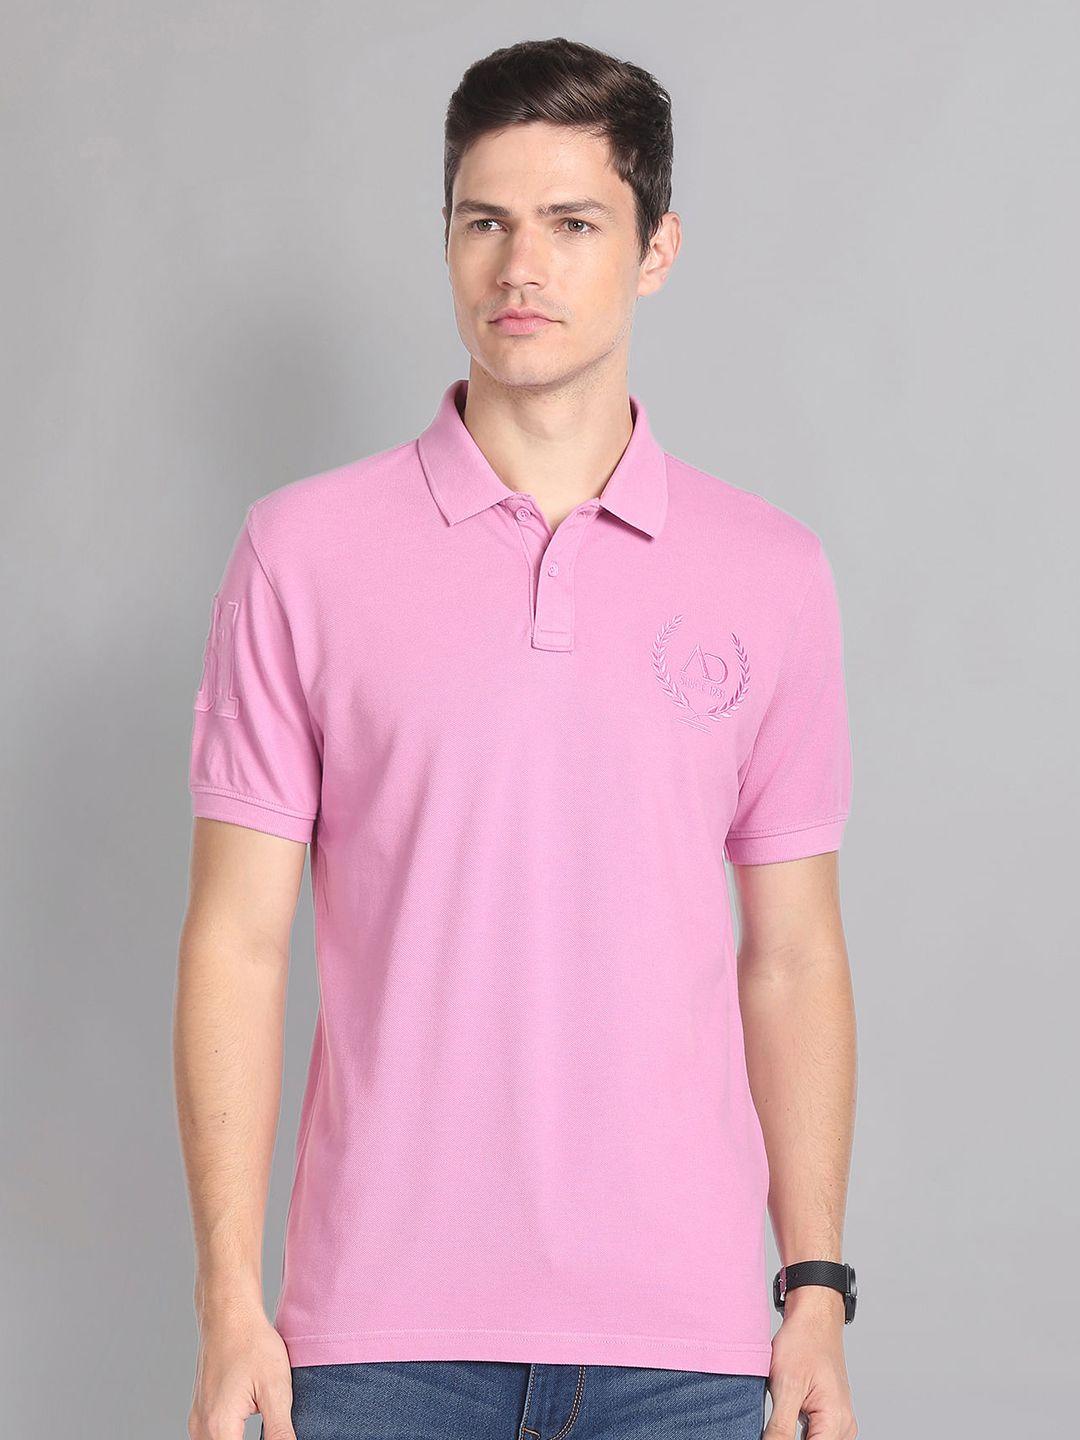 ad by arvind embroidered logo moistex finish polo collar slim fit pure cotton t-shirt